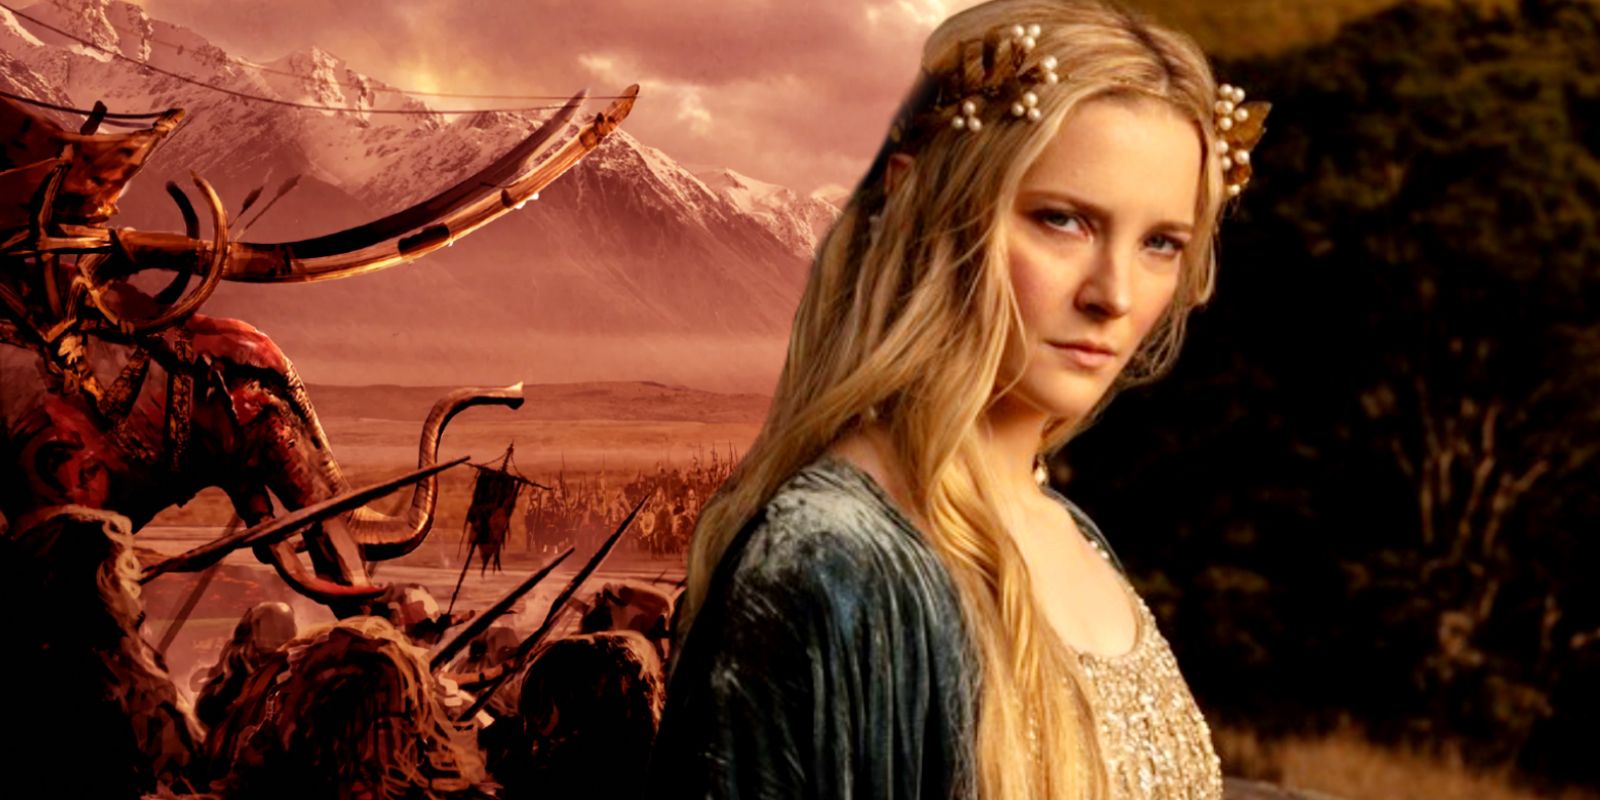 Lord of the Rings: The War of the Rohirrim next to Galadriel from The Rings of Power